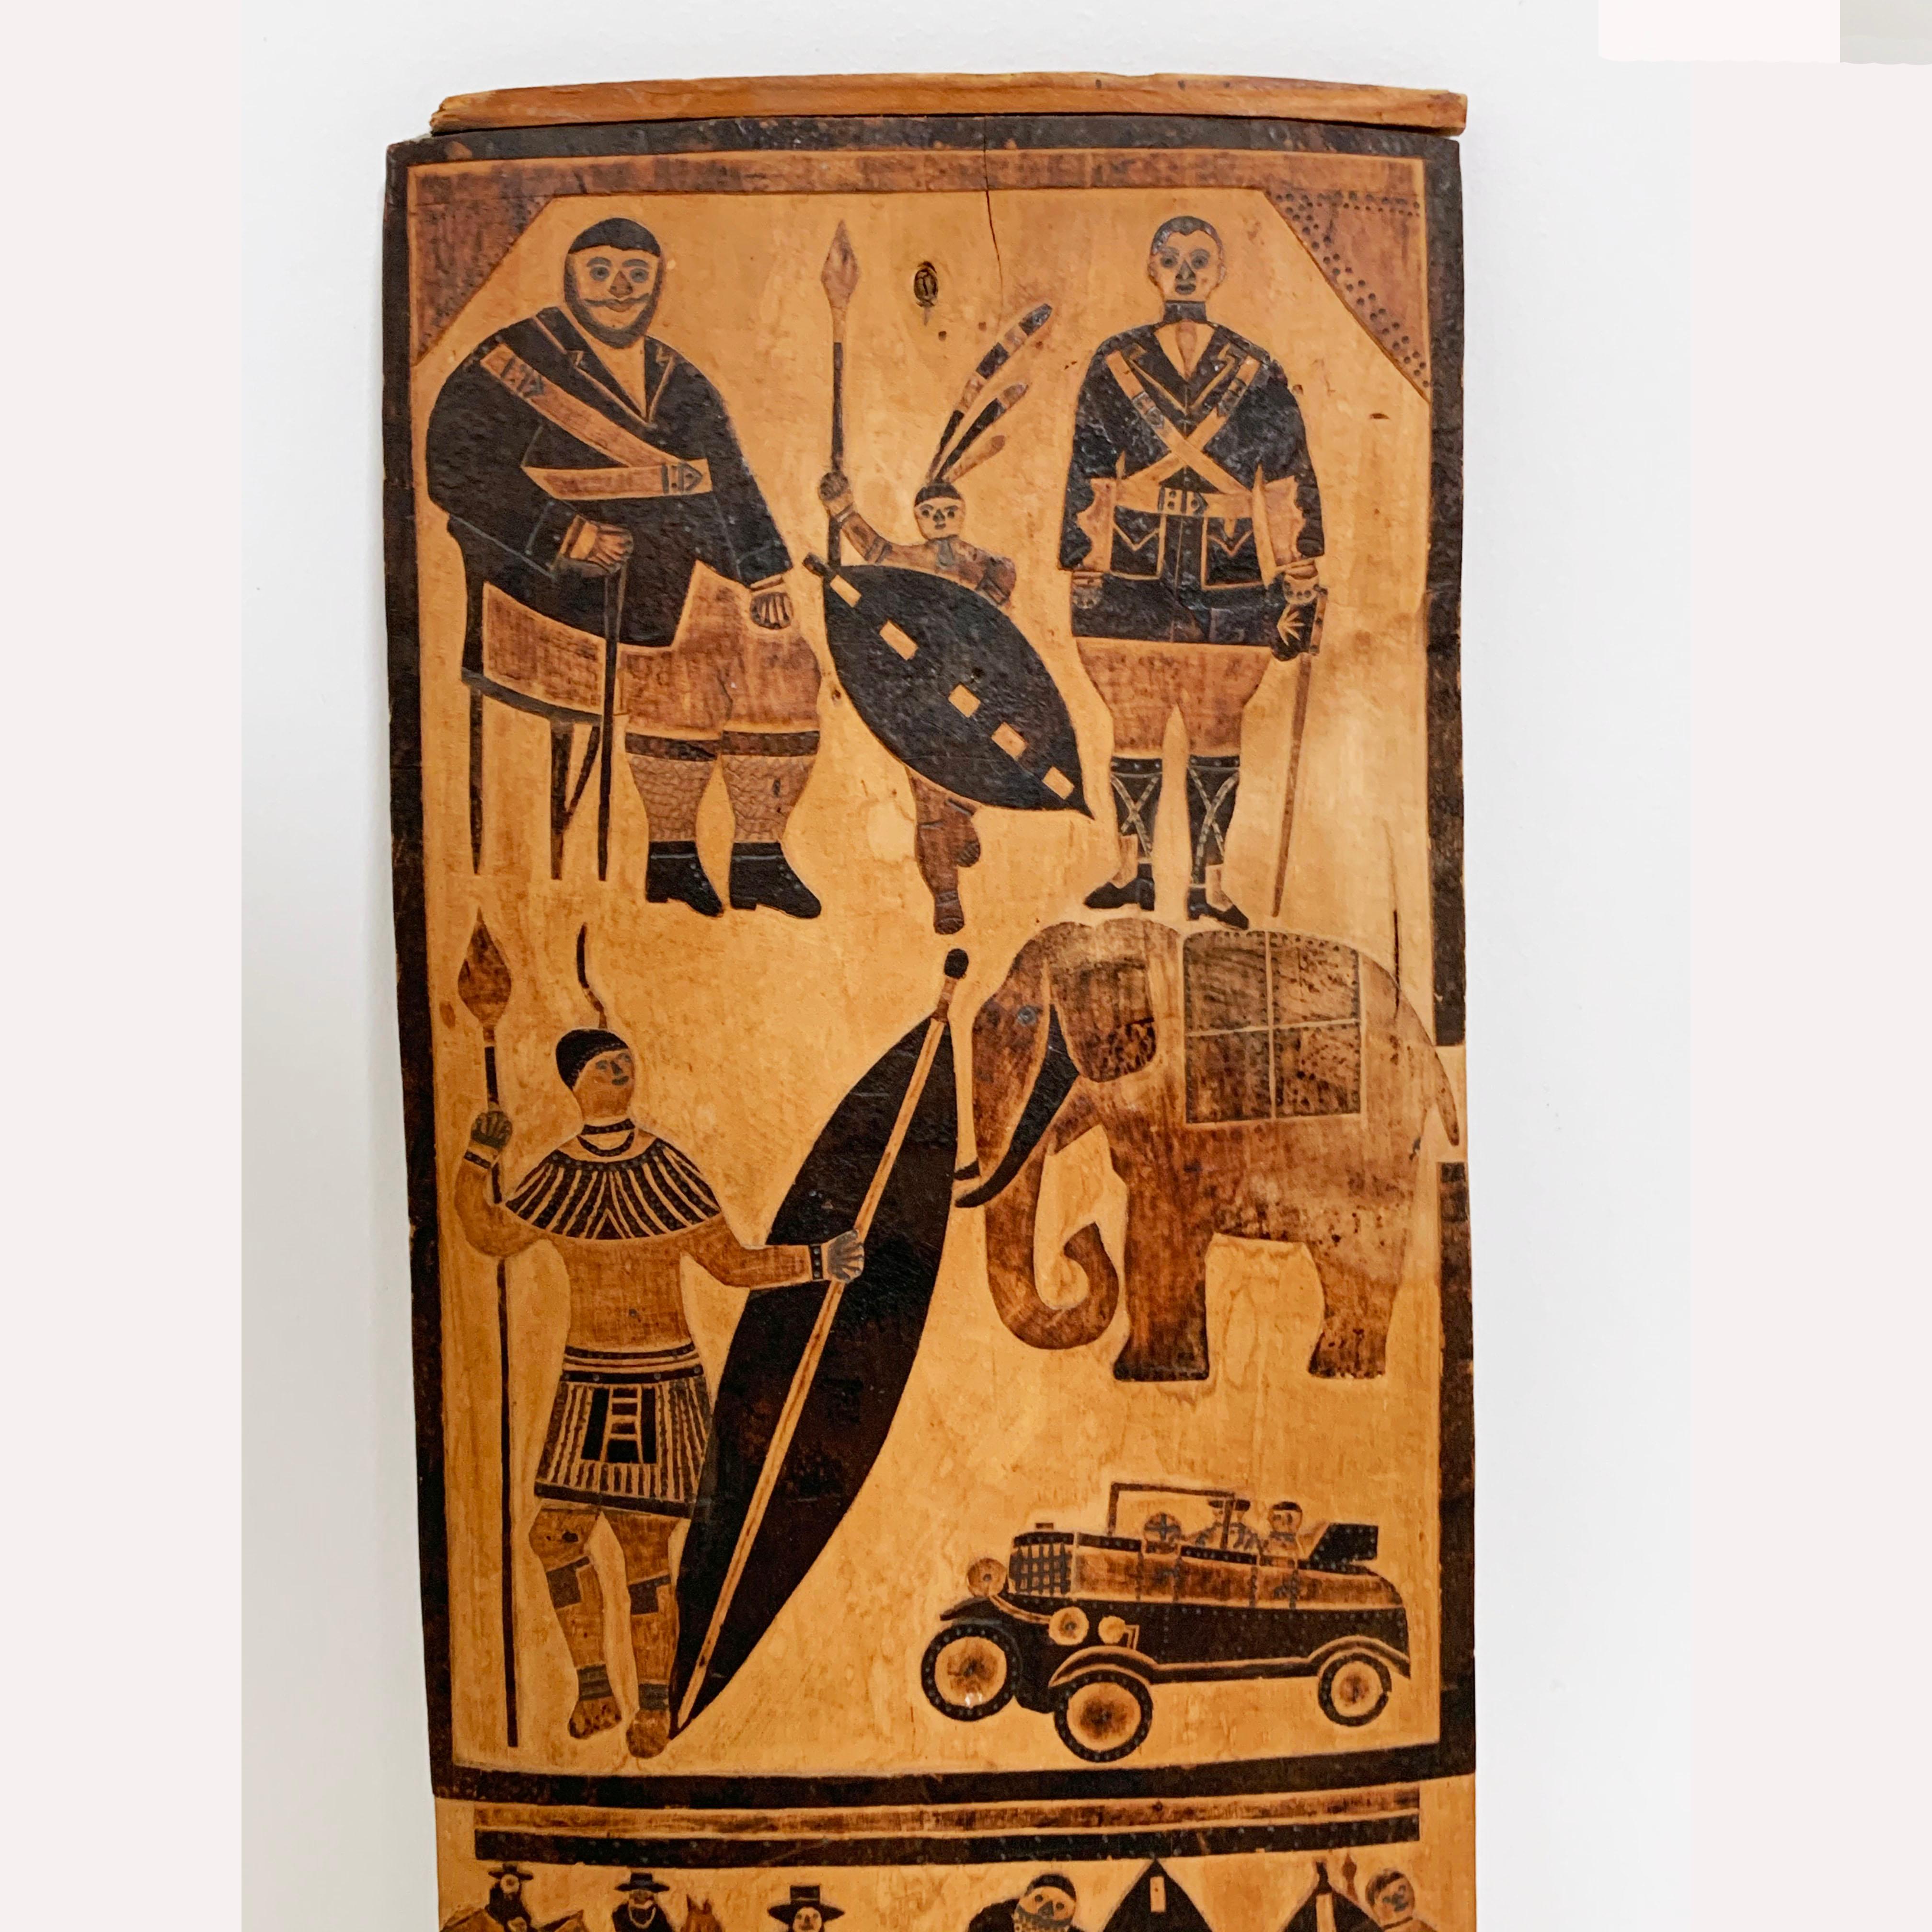 A rare relief carved and pigmented wooden storyboard panel detailing events of the late 19th and early 20th century related to South Africa’s Zulu history and the Boer Wars. Atop this folk art panel, dated 1937, is a depiction of two heroes of the